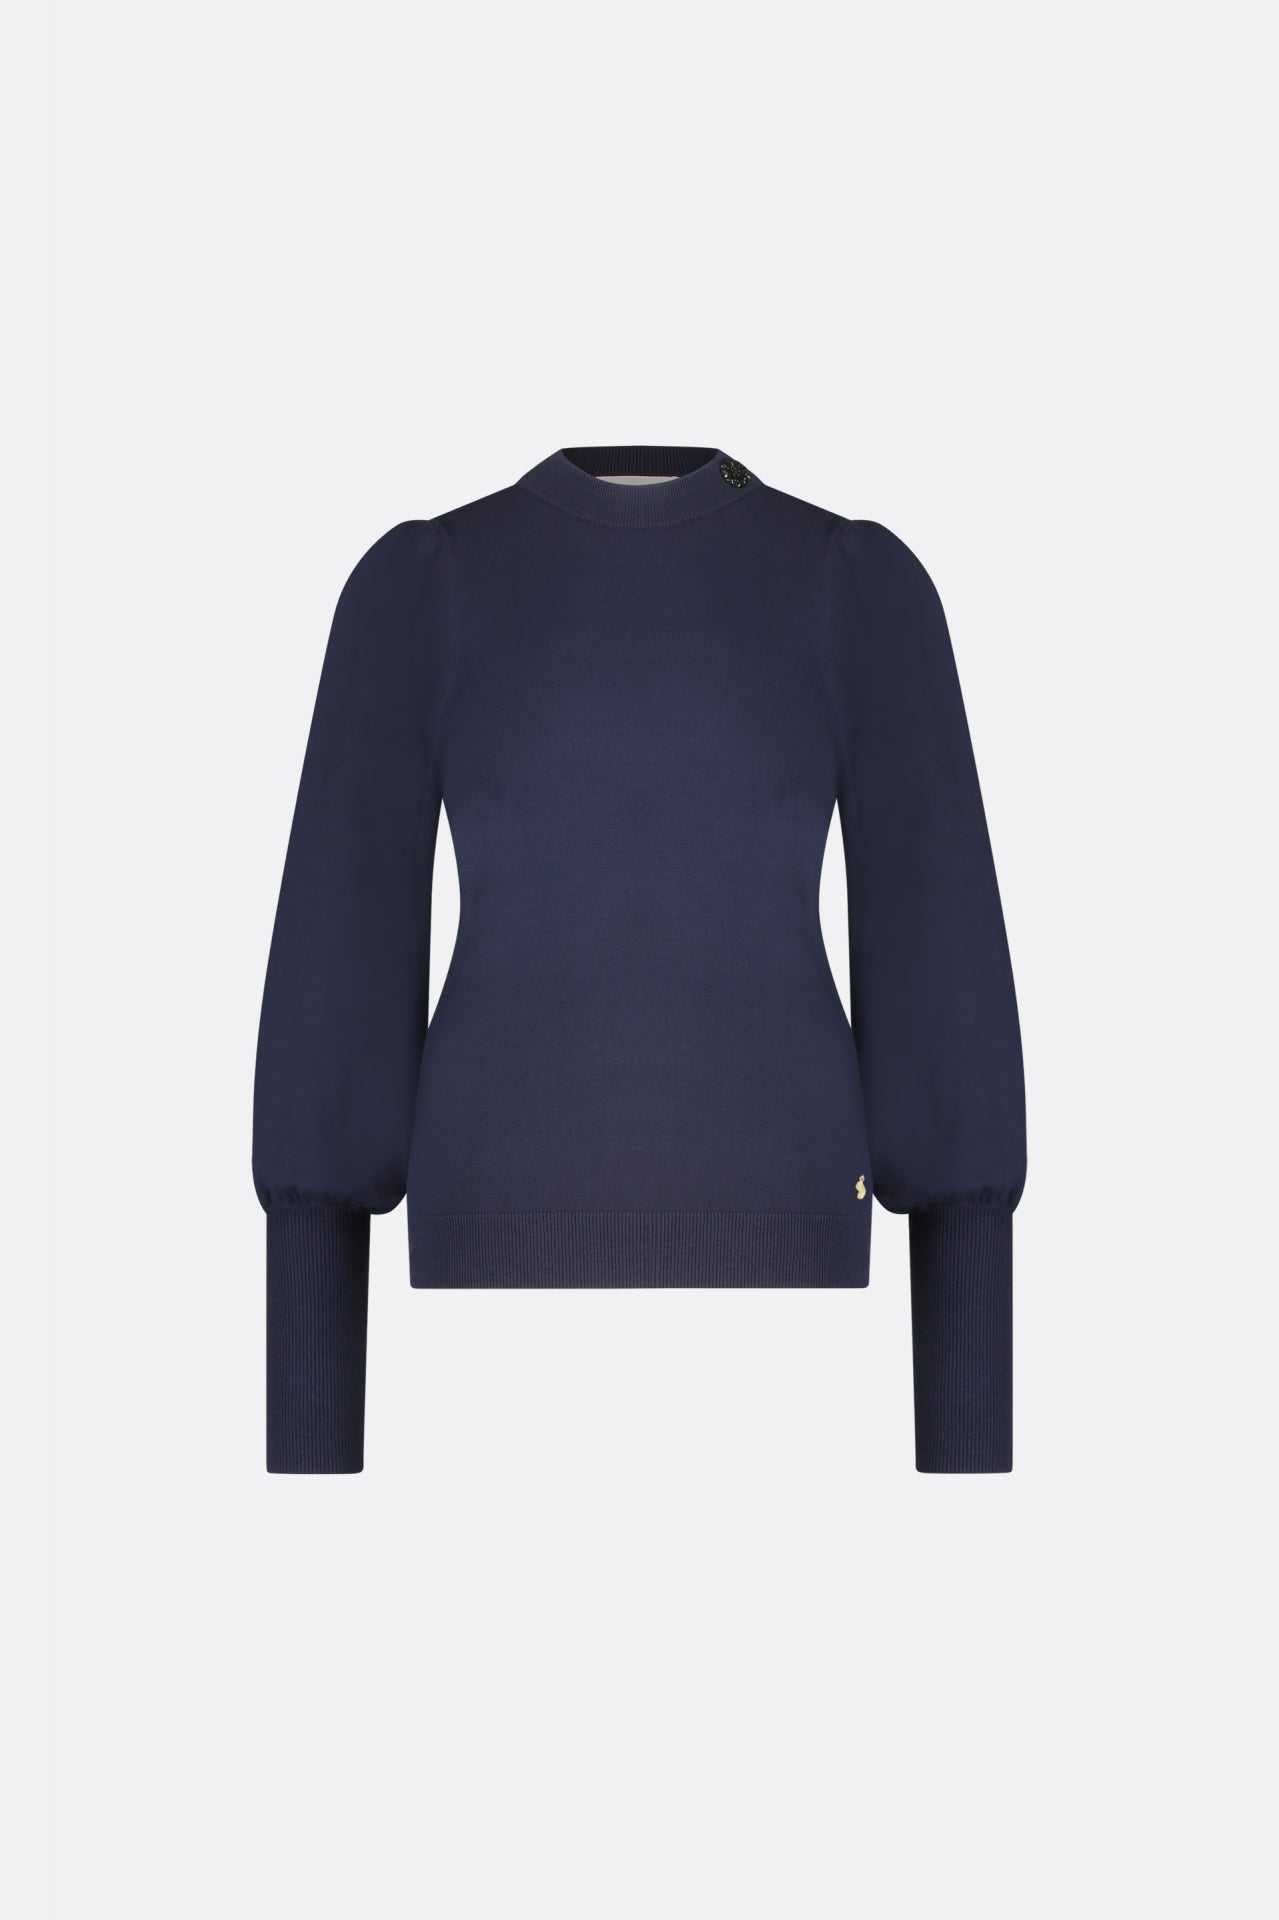 Beatrice Pullover Navy